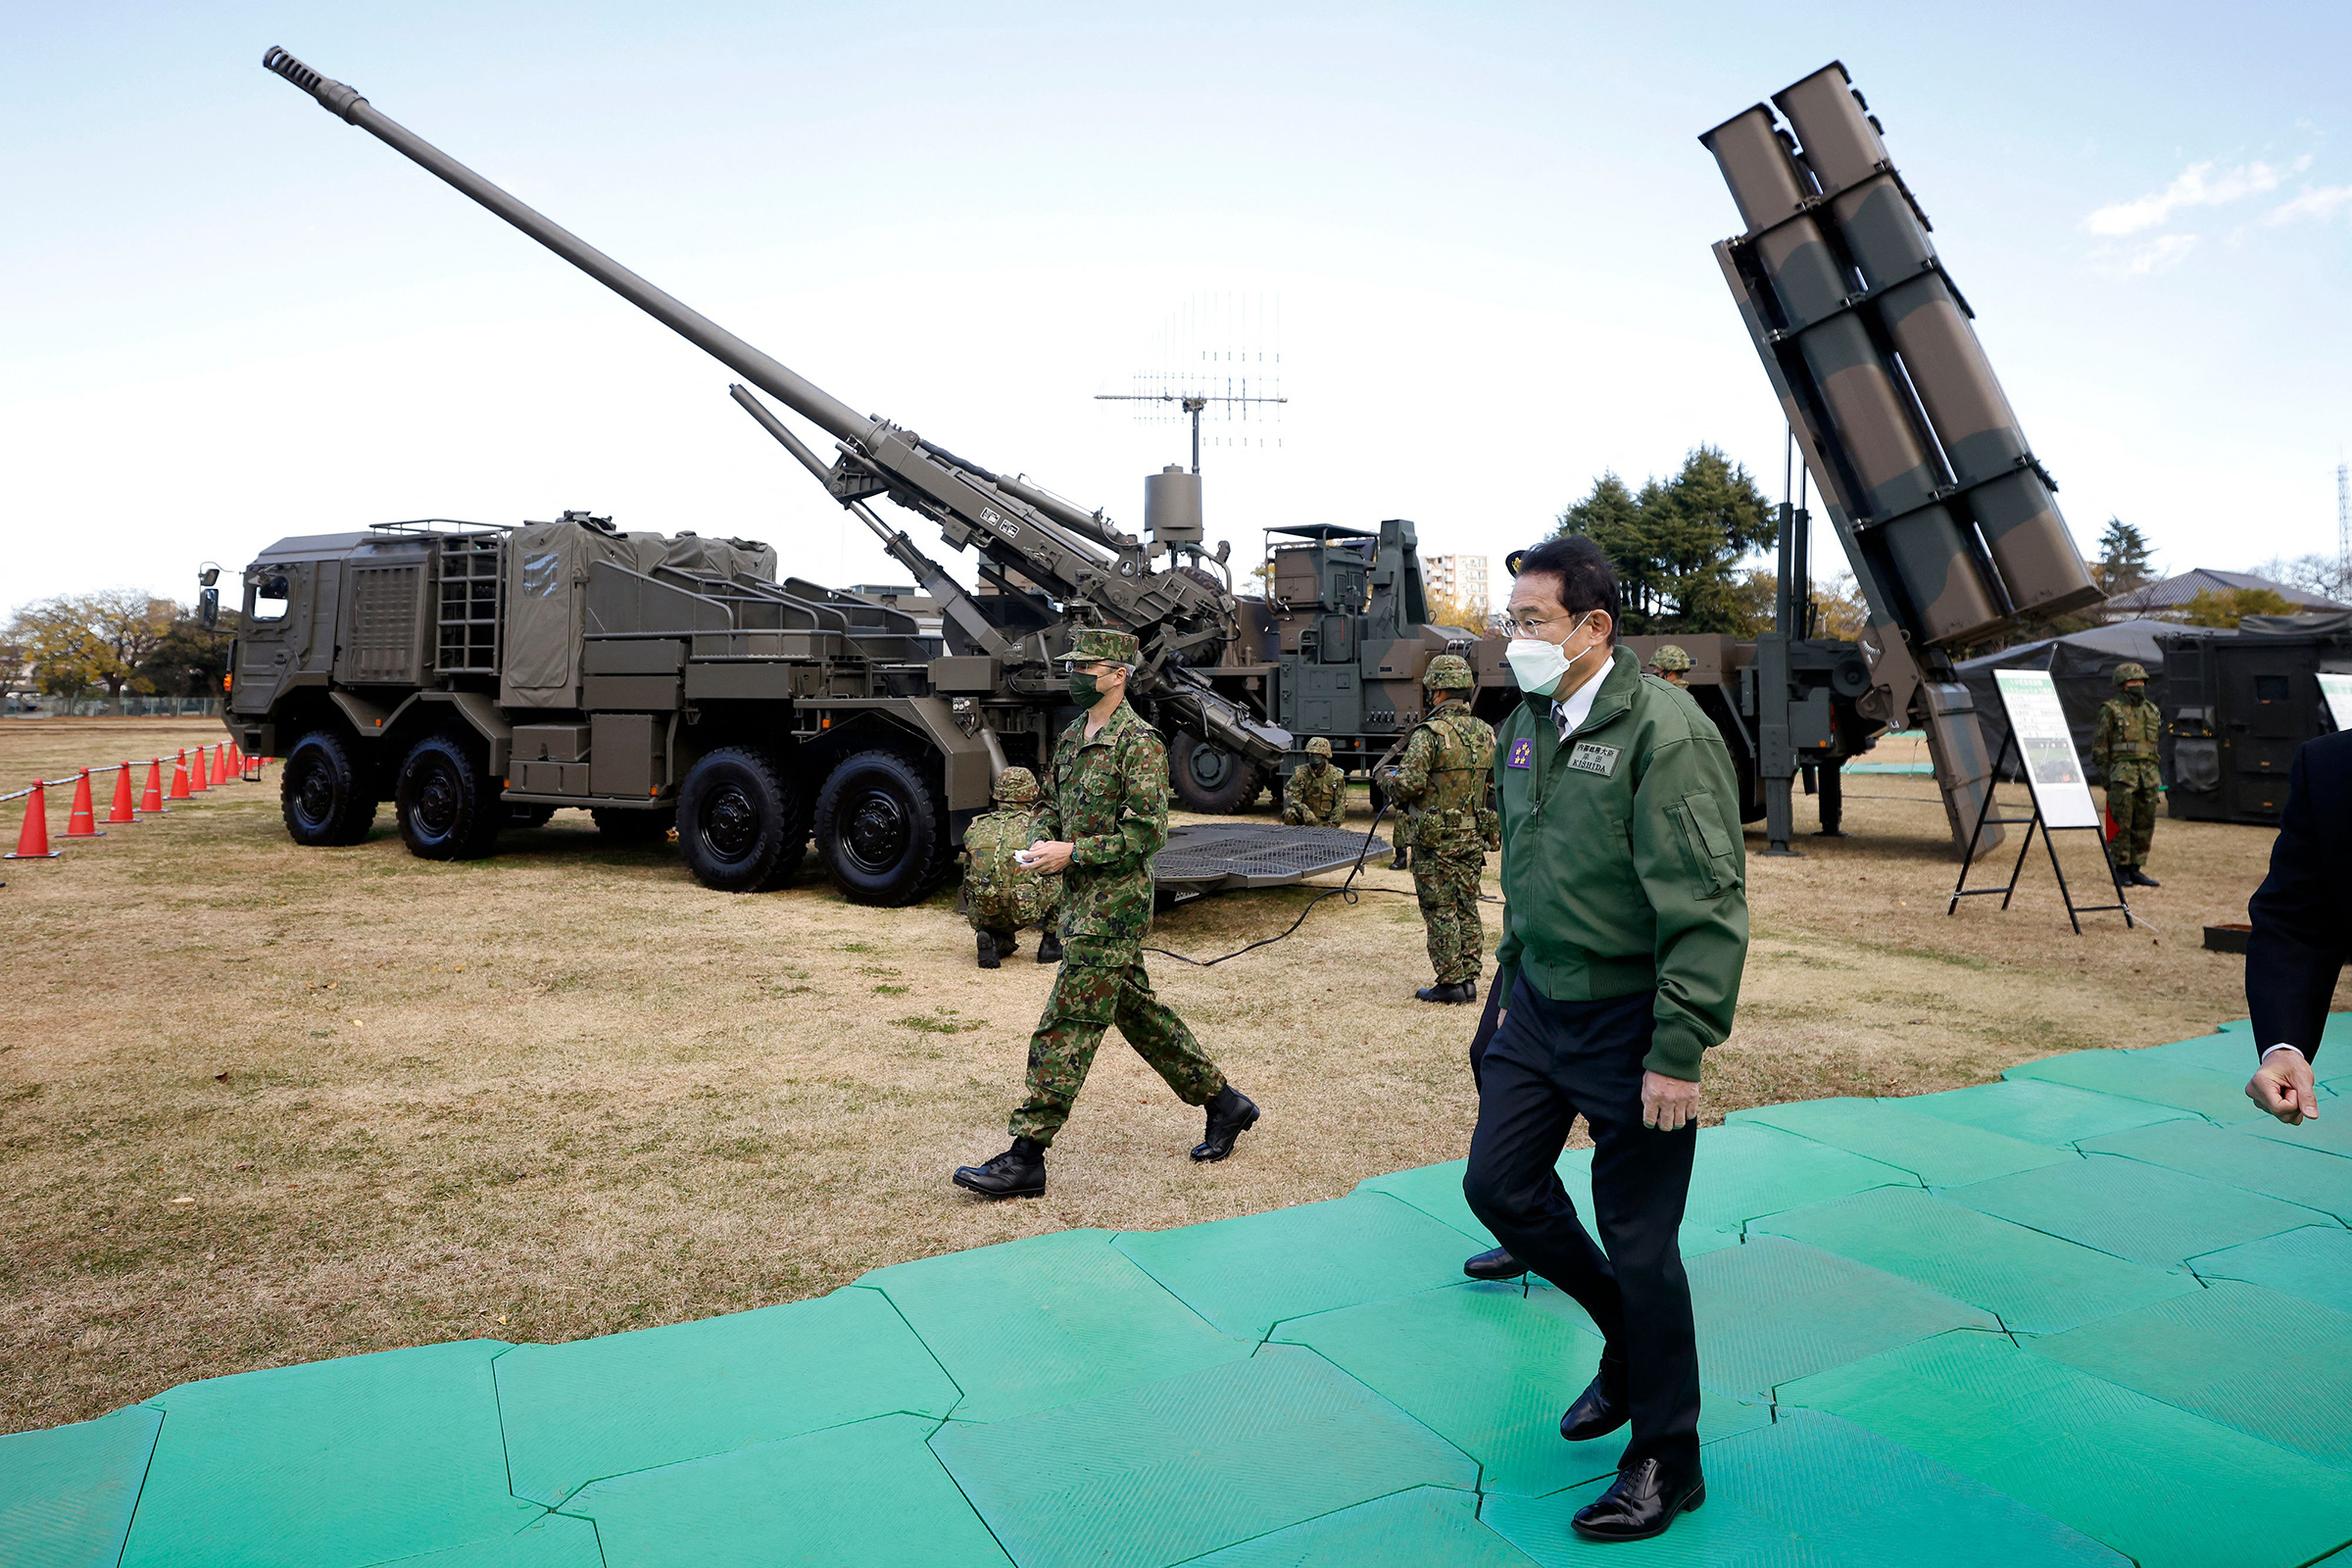 Prime Minister Kishida walks past a Japan Ground Self-Defense Force (JGSDF) Type 19 155 mm wheeled self-propelled howitzer and a Type 12 surface-to-ship missile as he inspects equipment during a review at JGSDF Camp Asaka in Tokyo on Nov. 27, 2021. (Kiyoshi Ota—Pool/AFP/Getty Images)